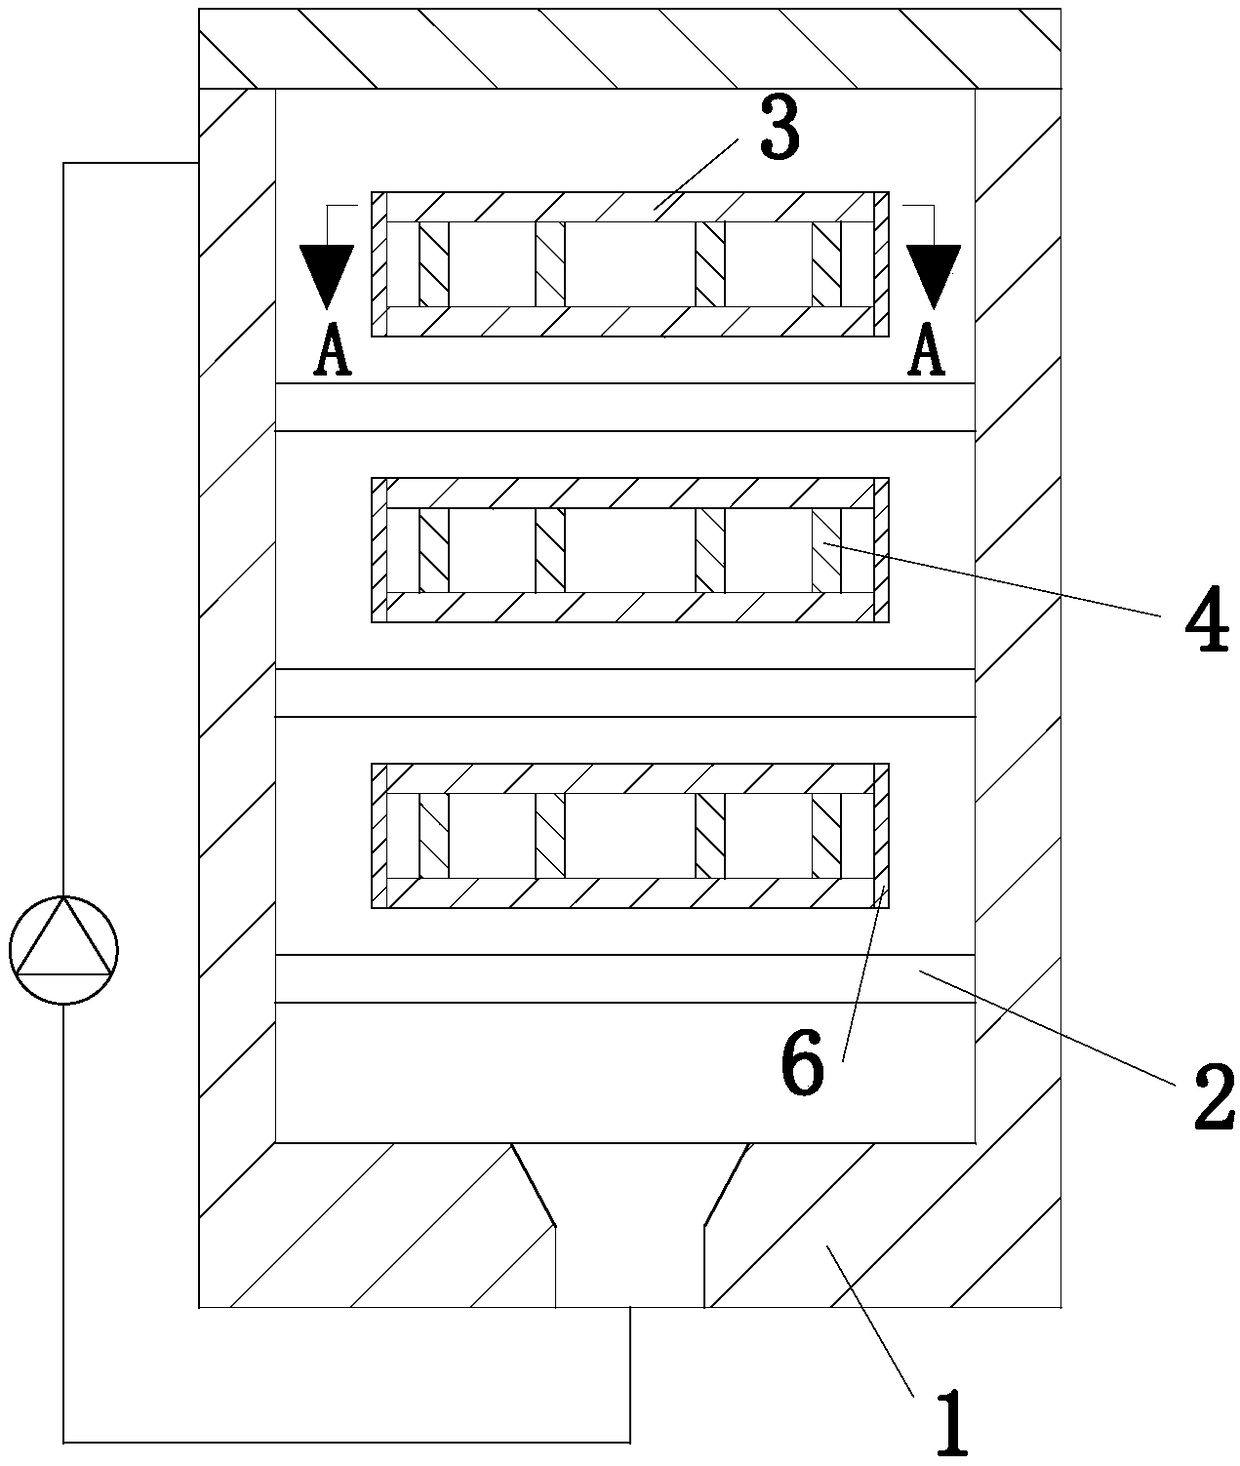 Conducting circuit manufacturing technology for chip